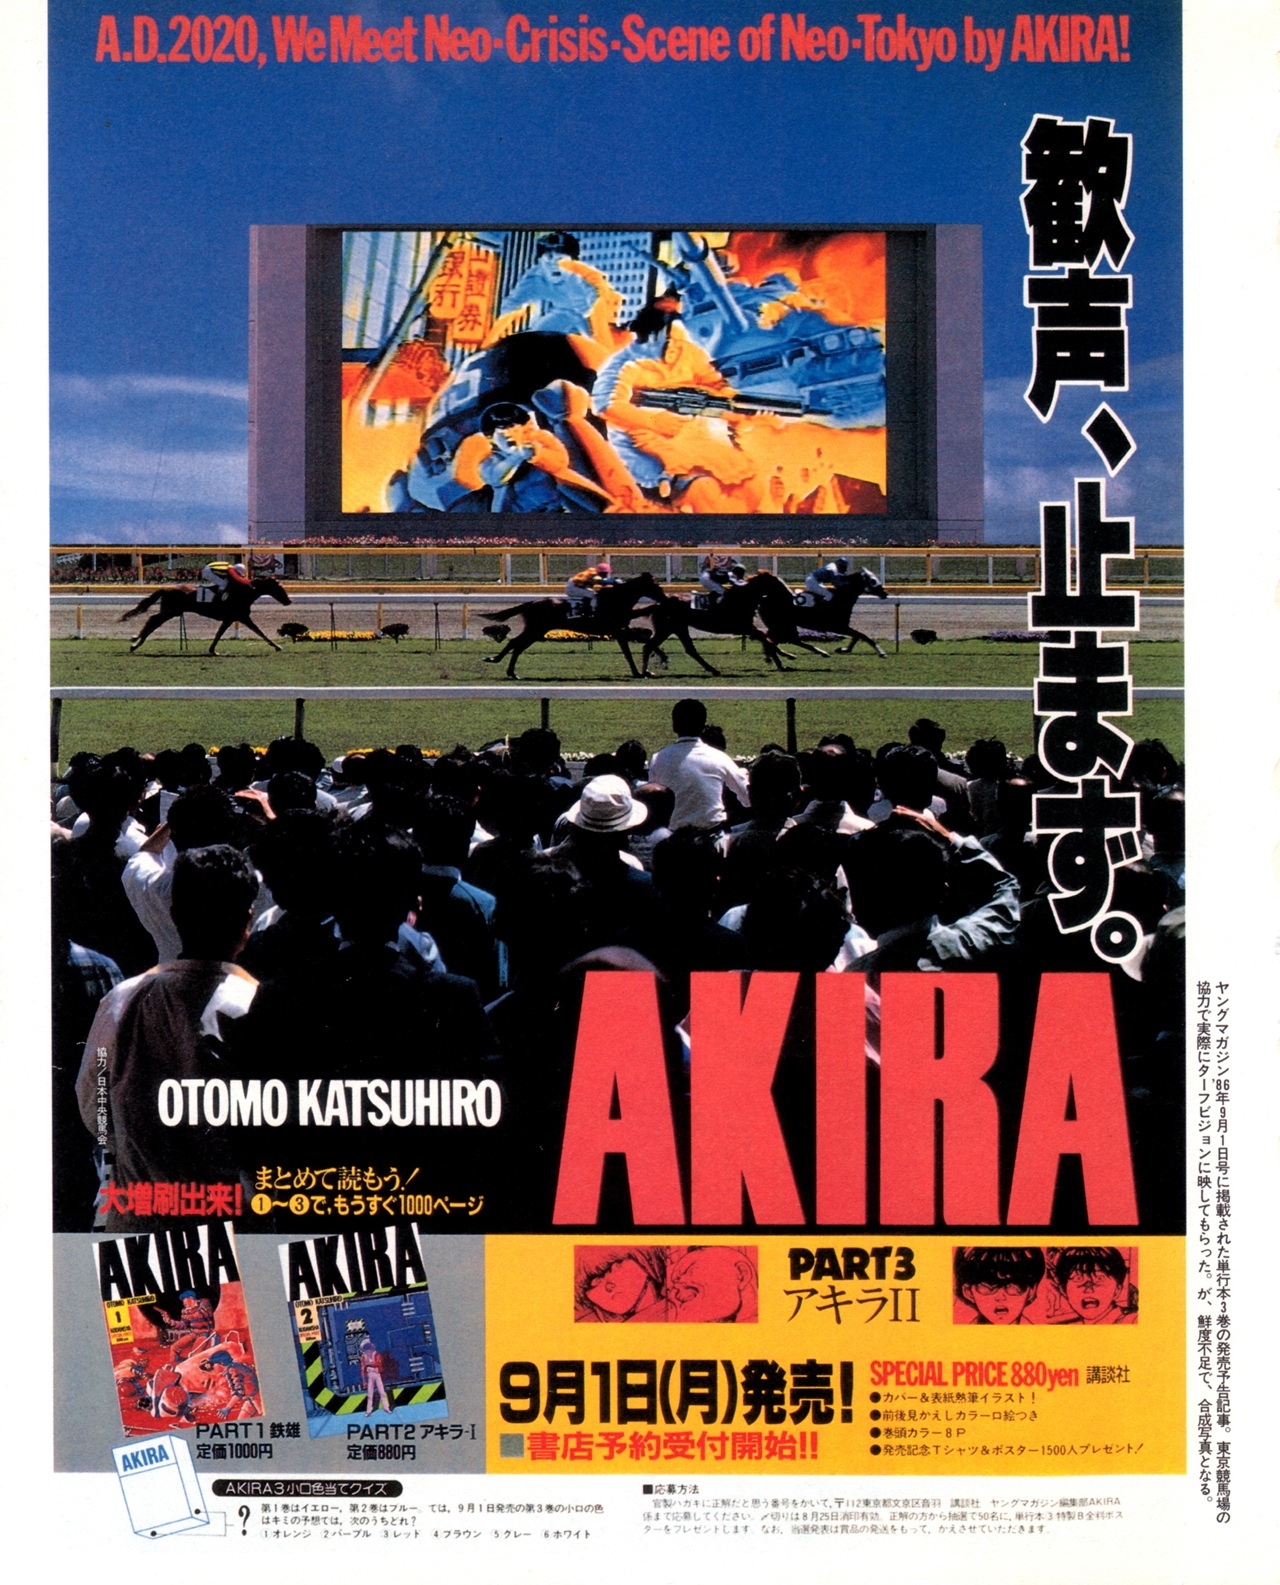 Akira club - The memory of Akira lives on in our hearts! 196